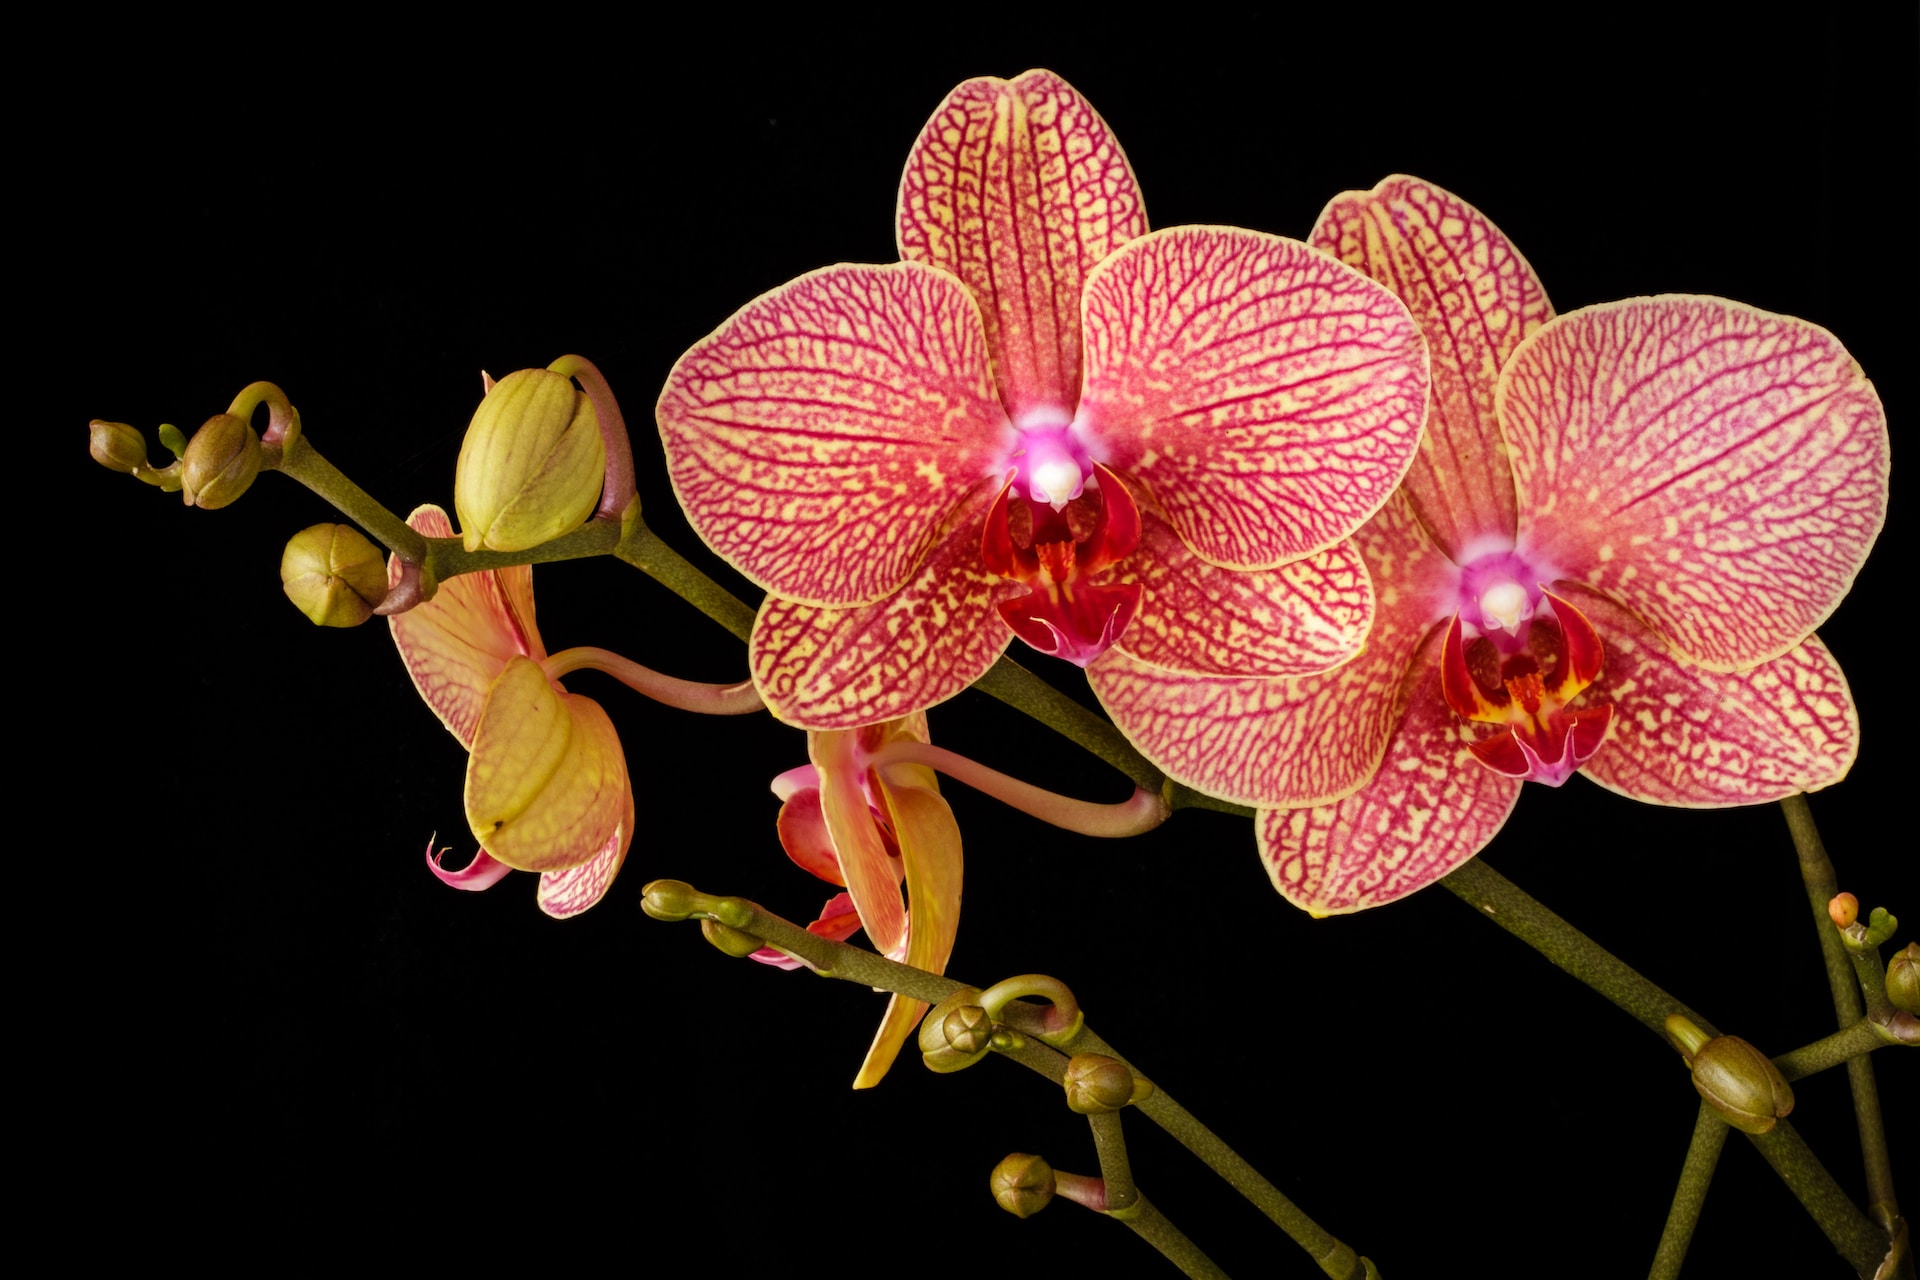 Two pink orchids on a stem against a black background.